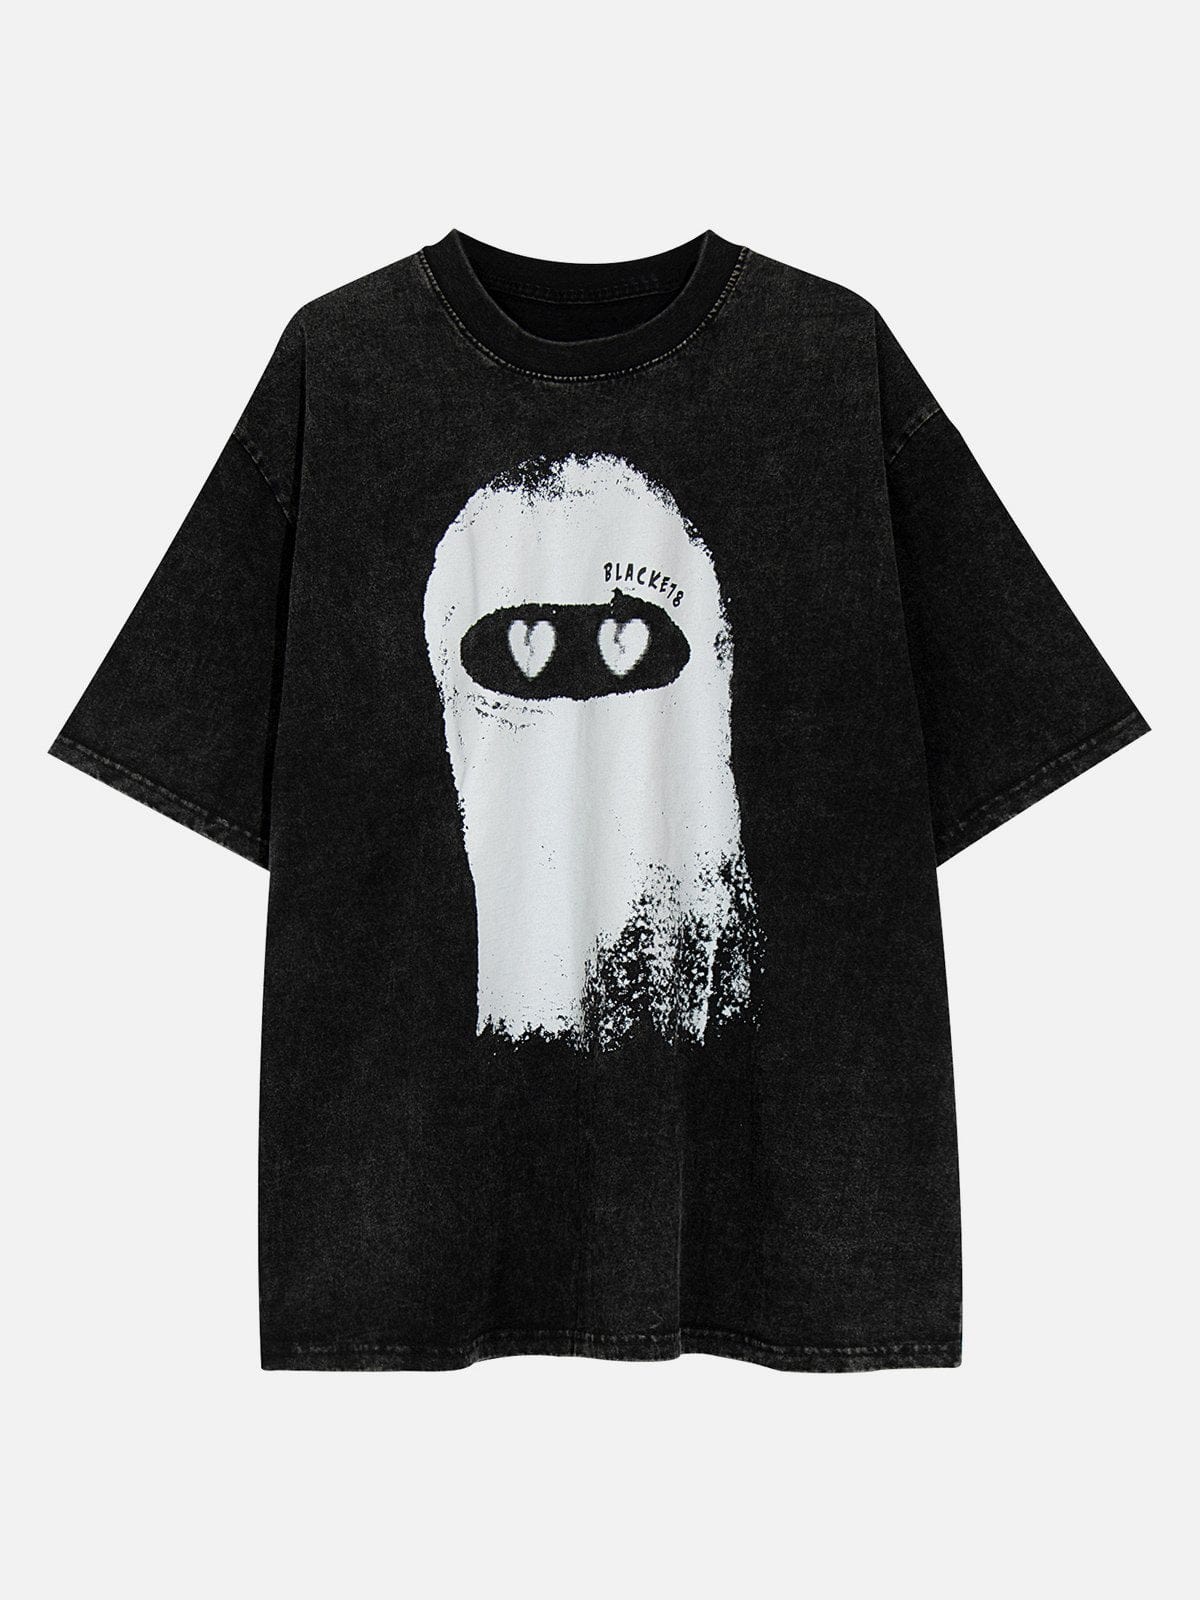 NEV Washed Spectre Print Tee